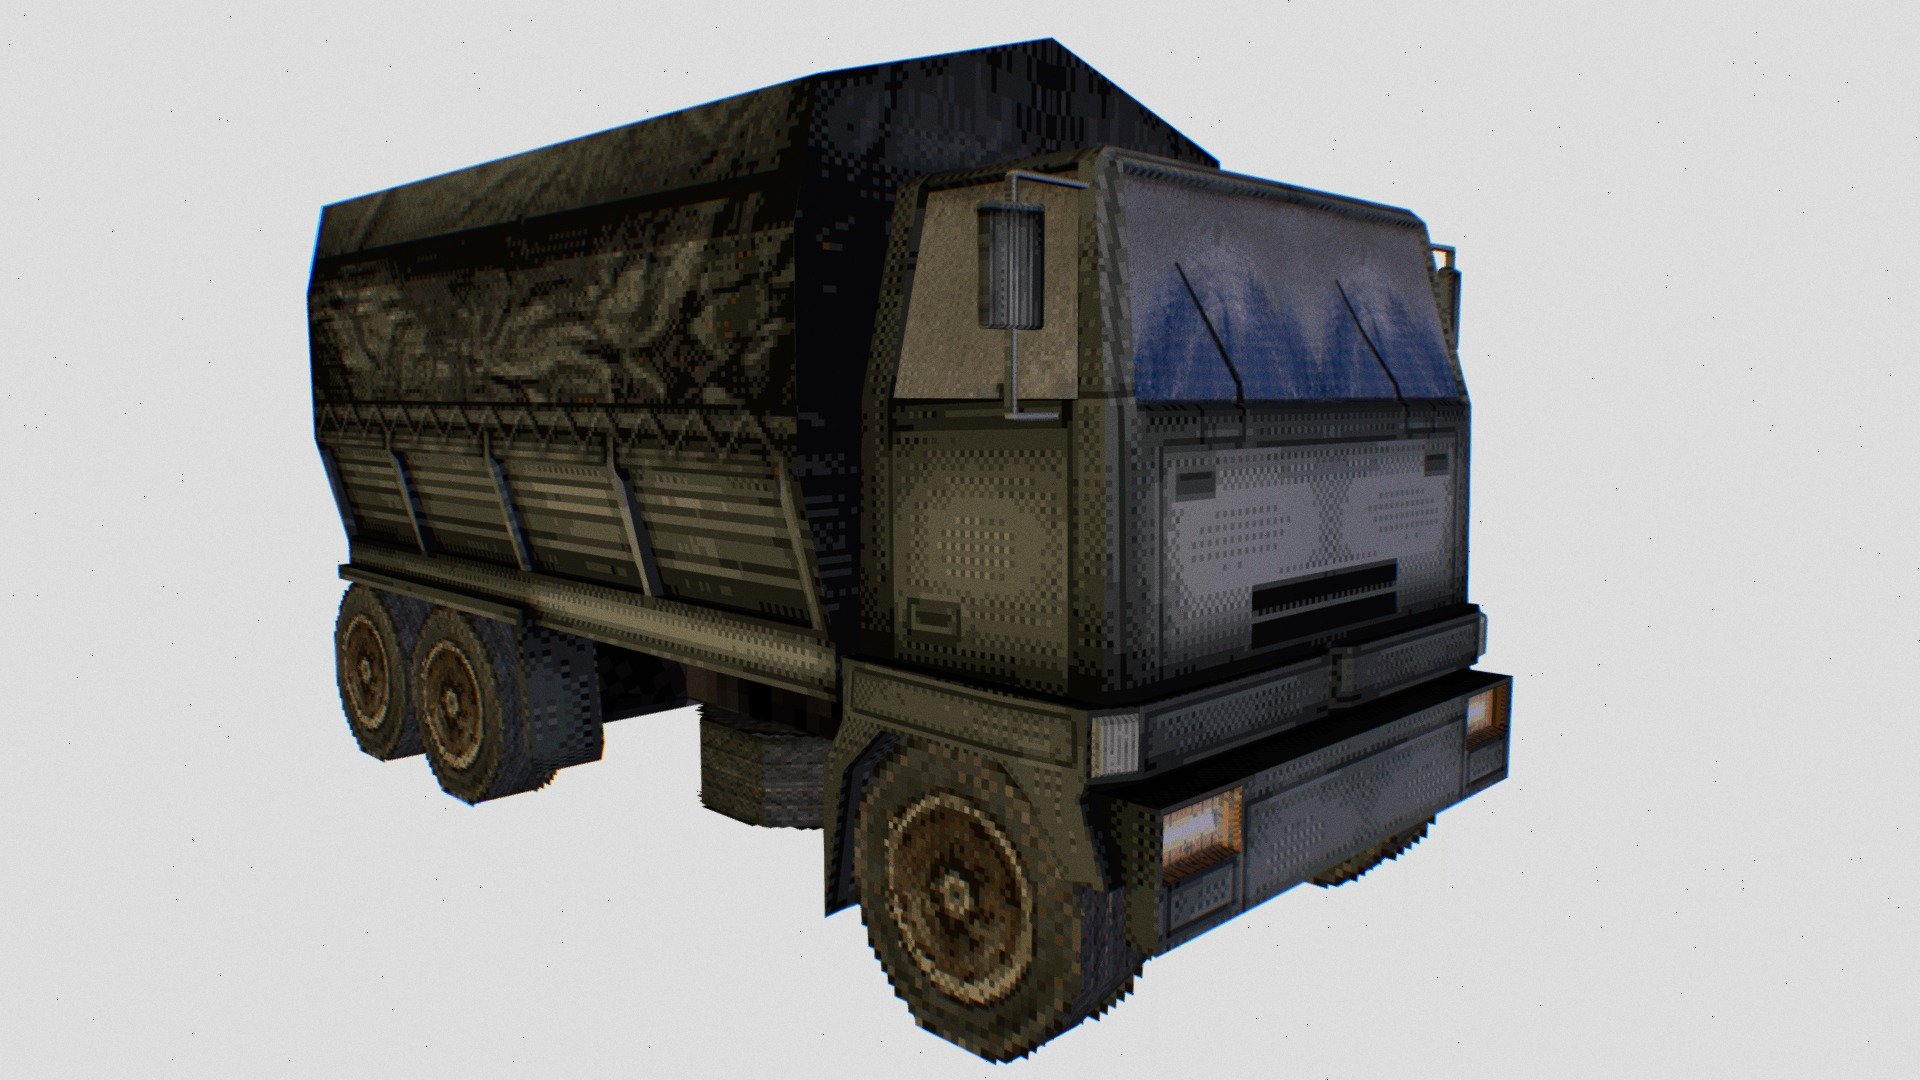 My custom designed army truck

Designed for retro inspired projects or mobile games.

My YouTube channel where I document my game dev journey - https://www.youtube.com/@AaronMYoung
Contact me on - Aaronmyoung94@gmail.com - PS1 Style Asset - Army Truck - 3D model by AaronMYoung 3d model